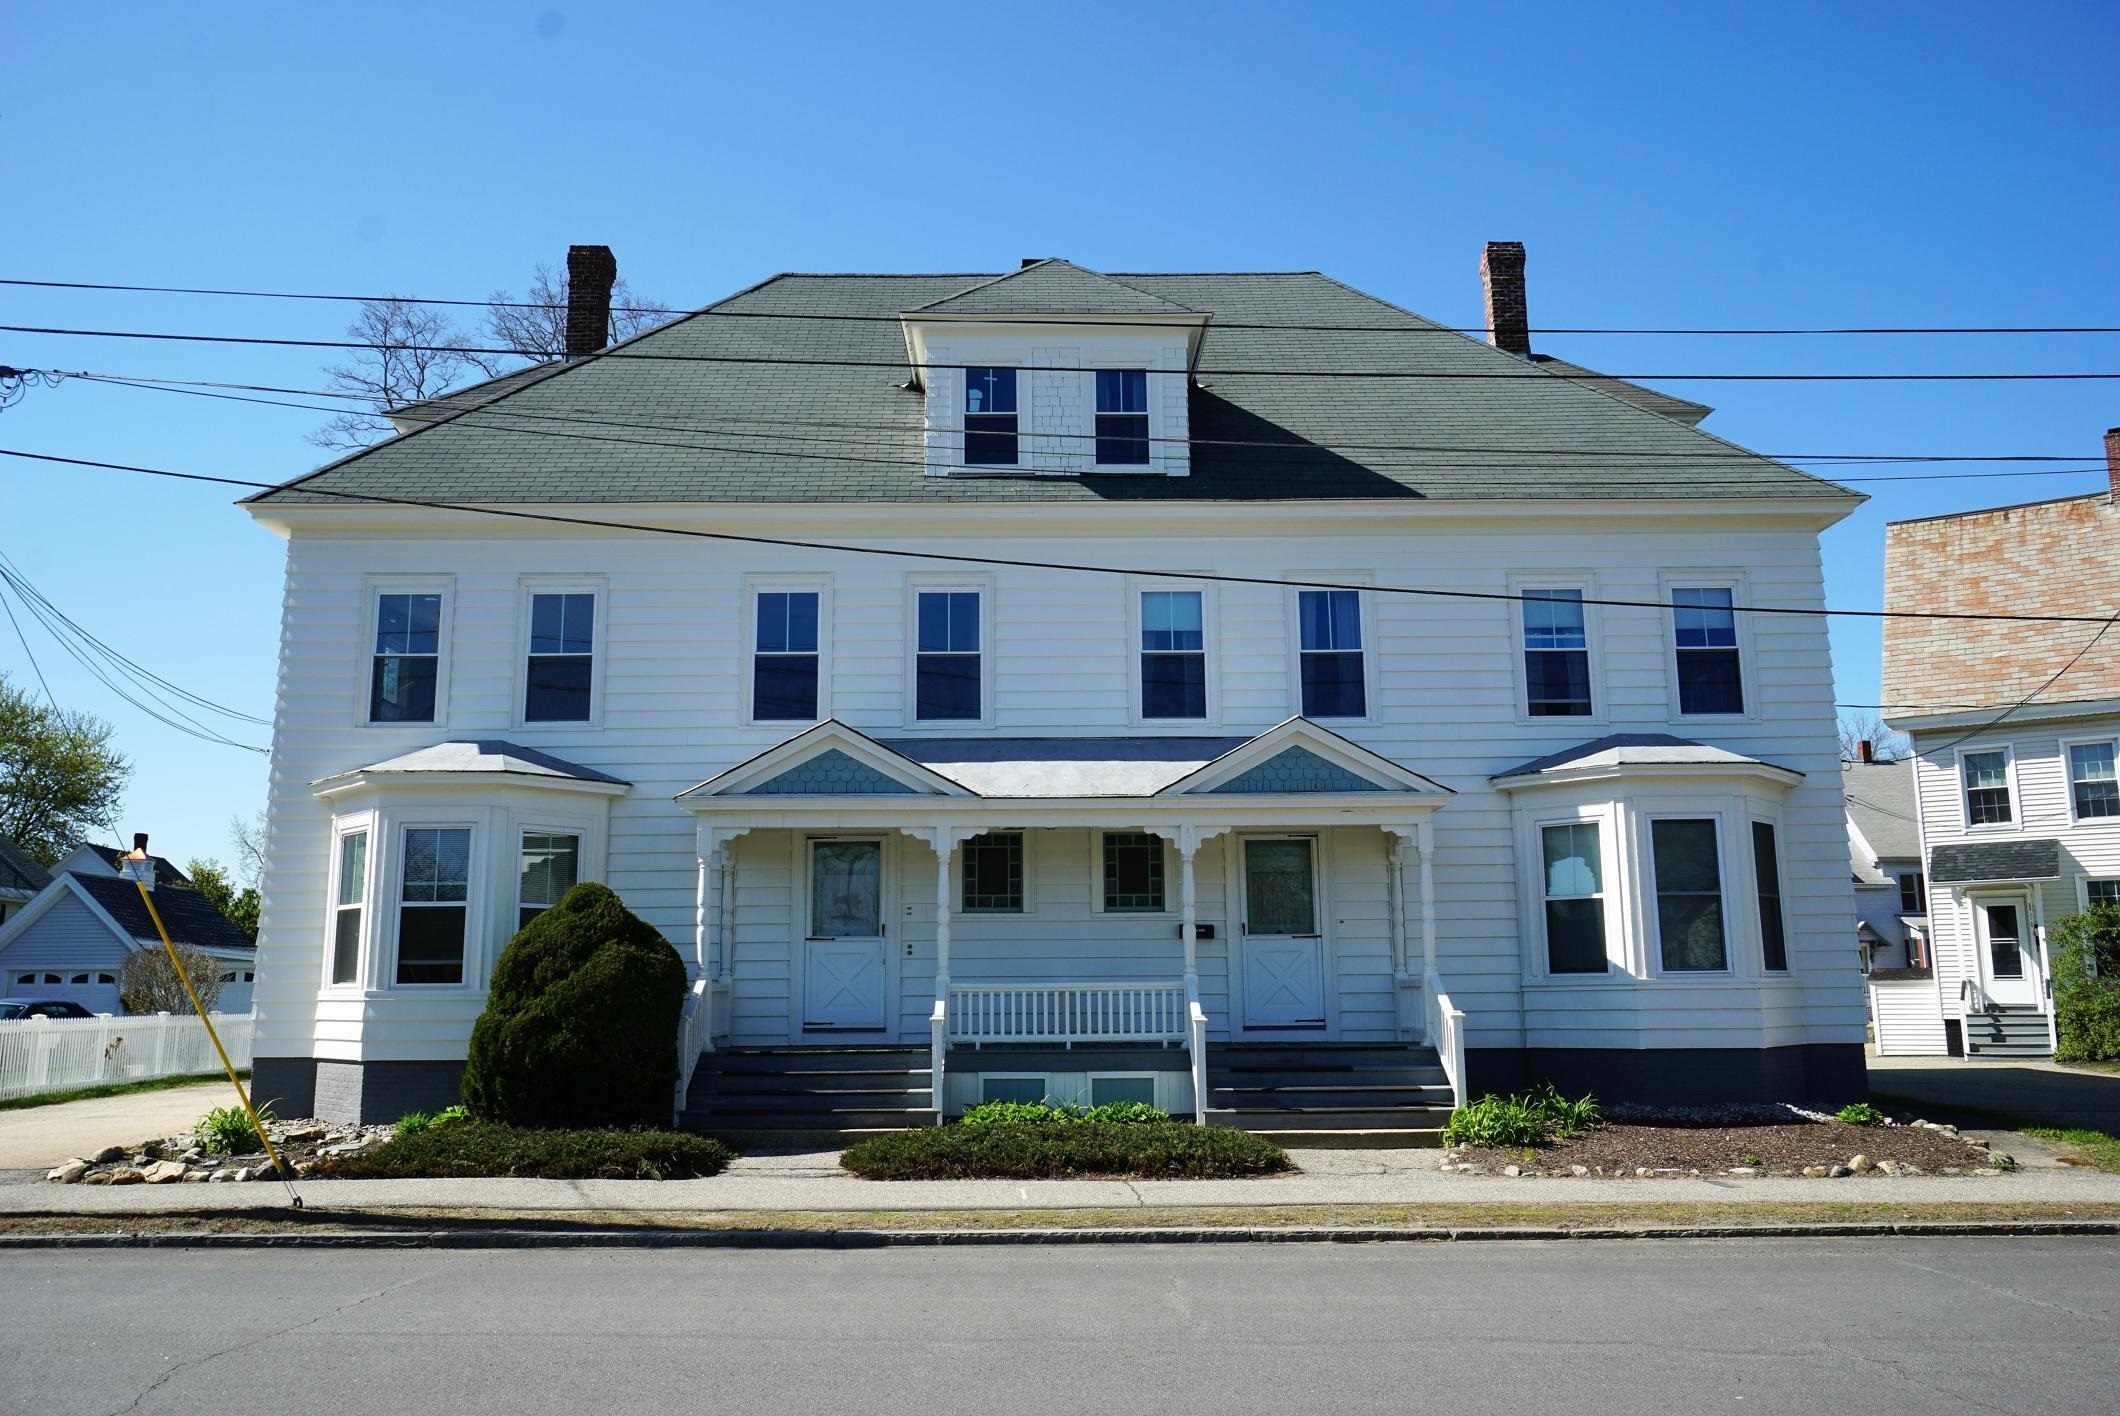 Photo of 2-4 Allison Street Concord NH 03301